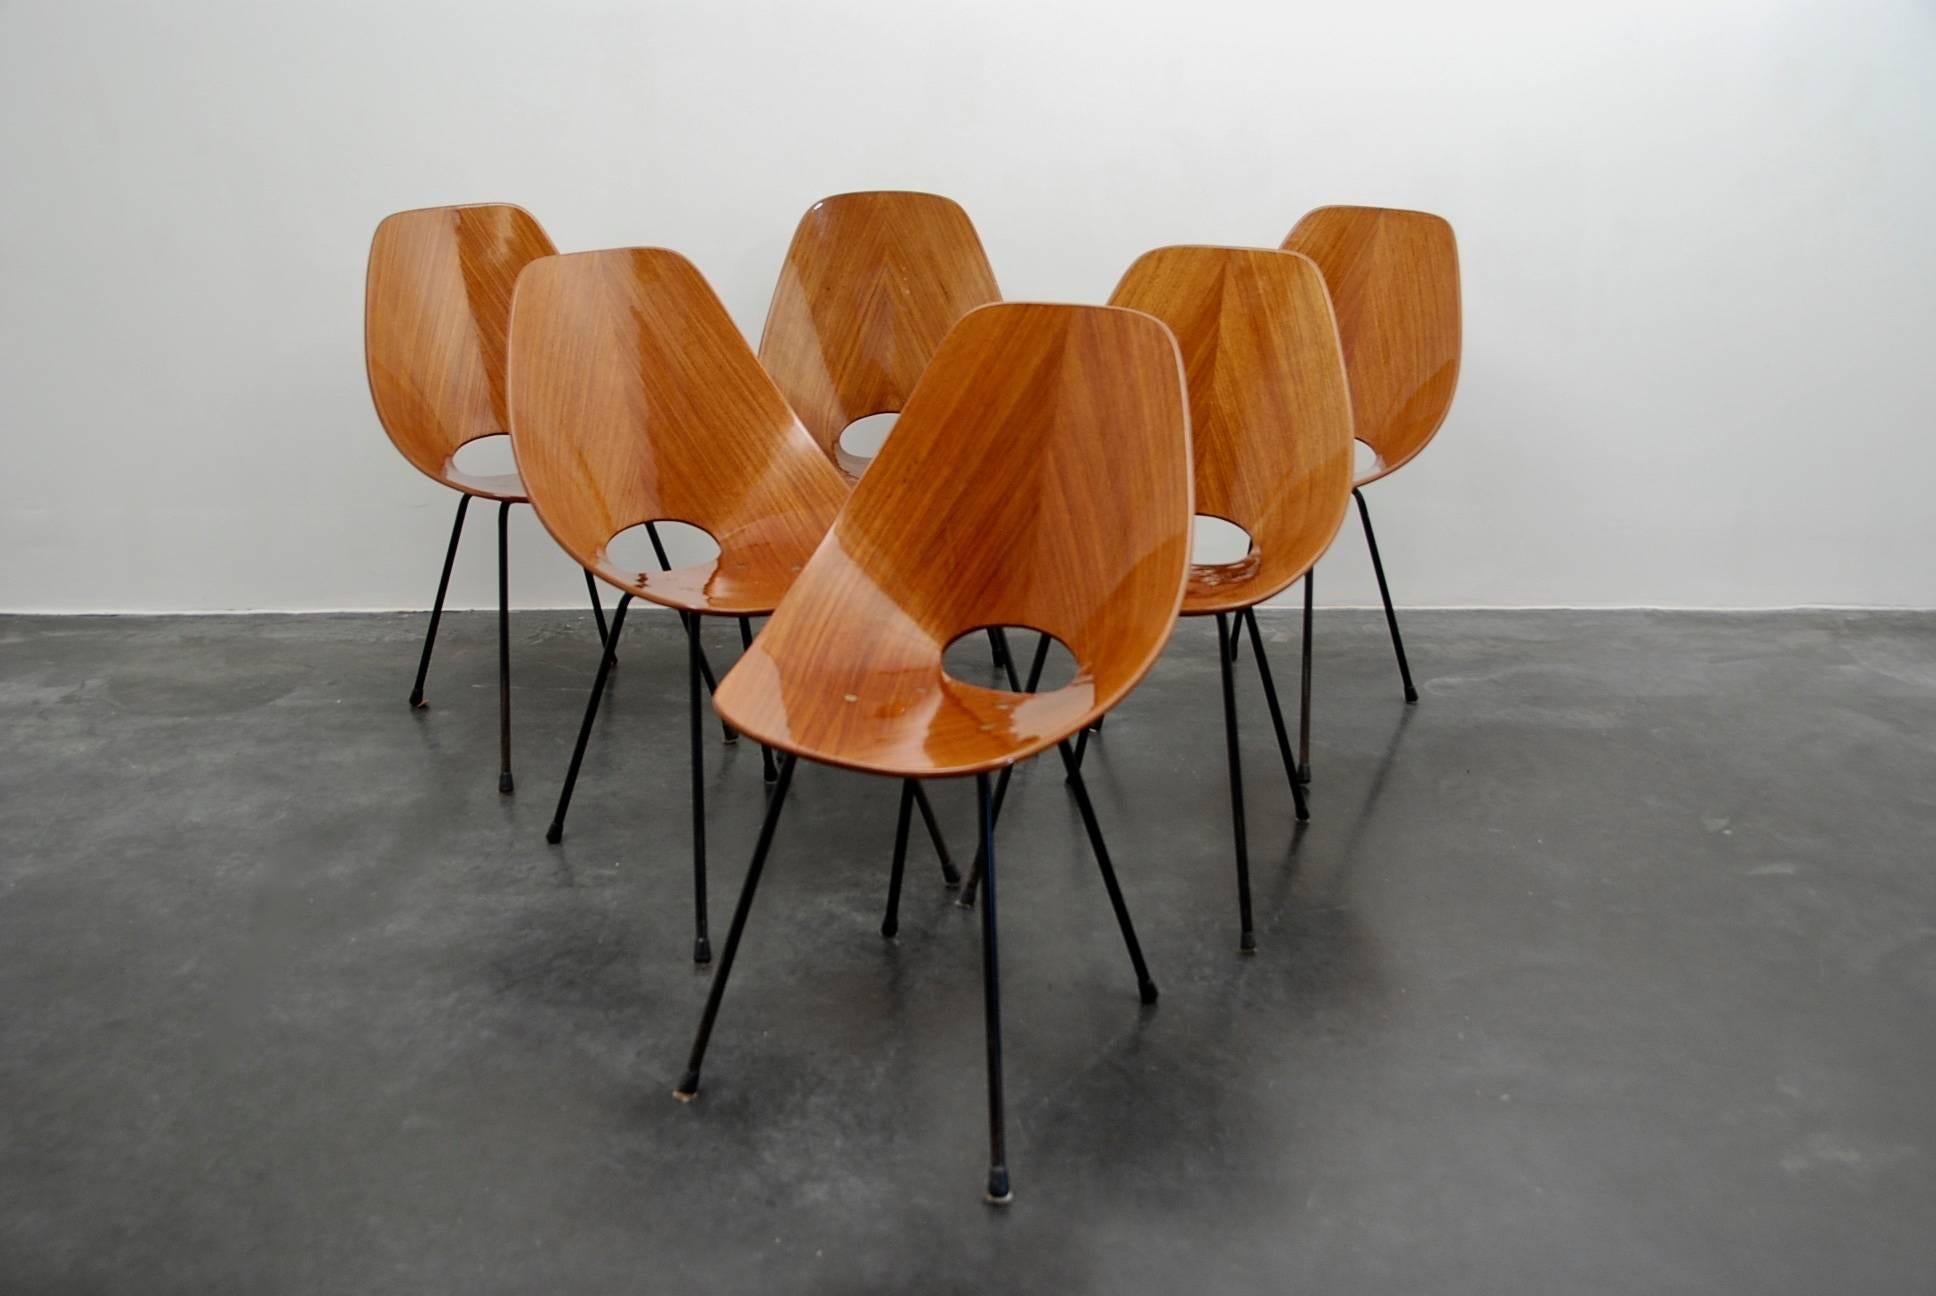 Very nice set of six chairs Medea designed by Vittorio Nobili for Tagliabue, Italy 1950s.
All original condition.